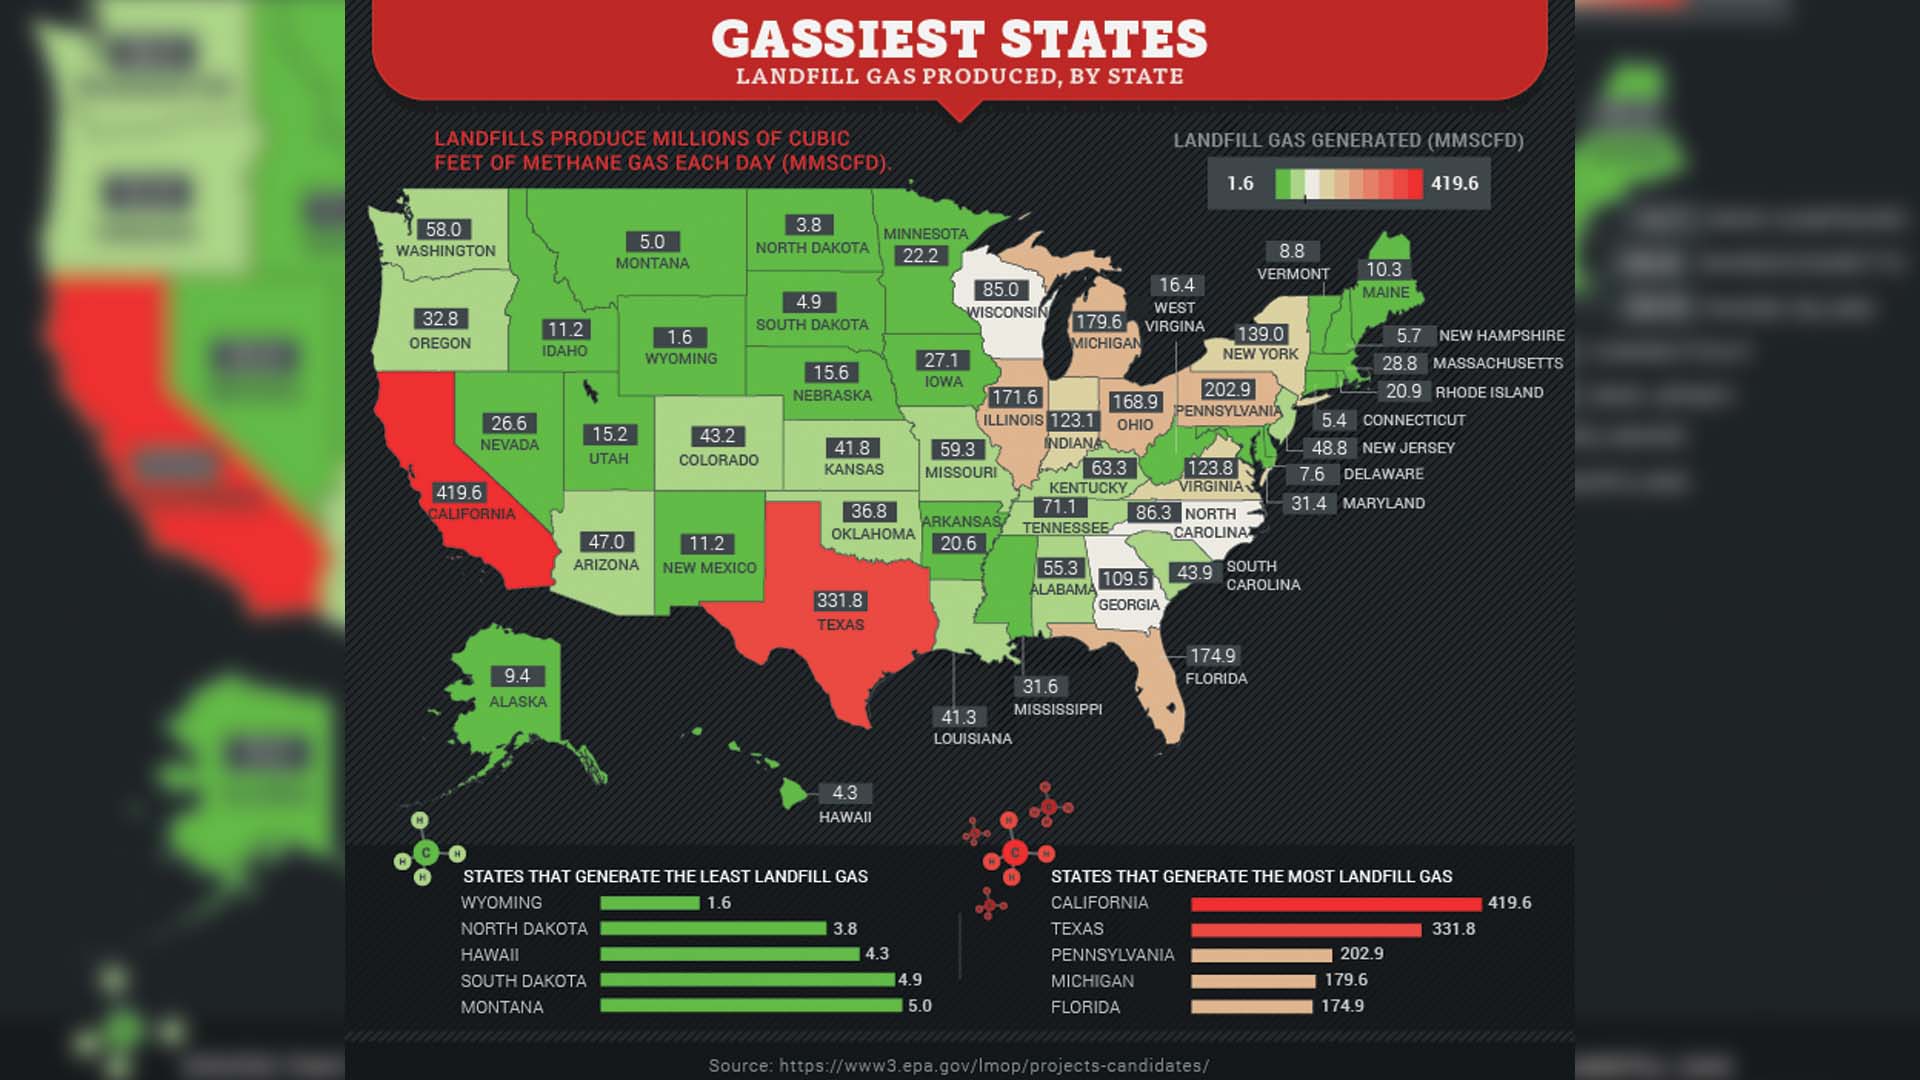 Landfill Gas Produced By State